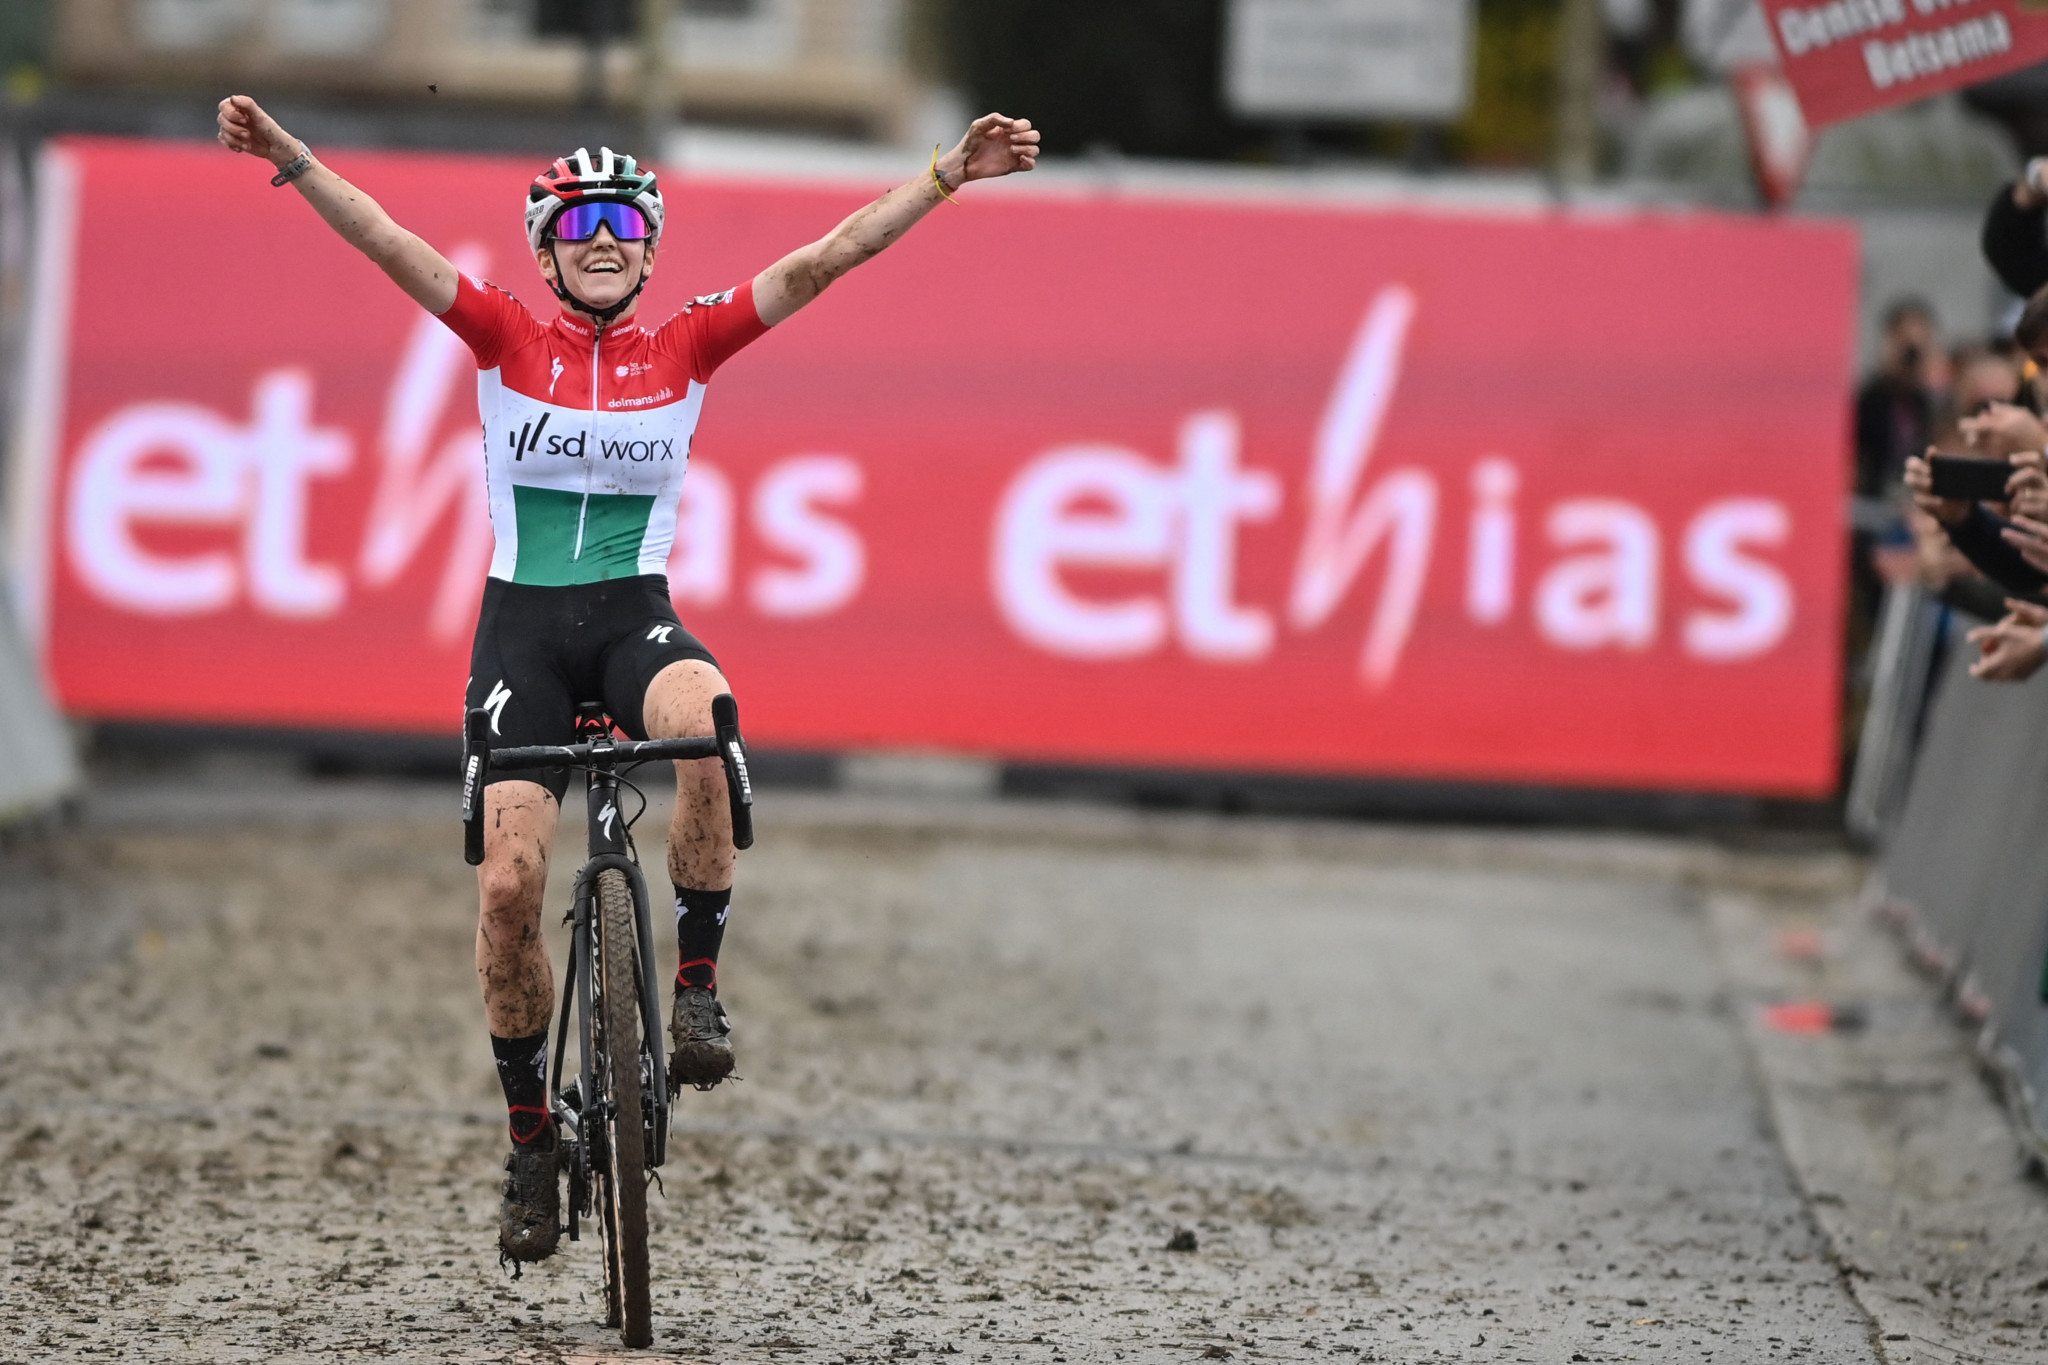 Hungary's Kata Blanka Vas secured her first UCI Cyclo-cross World Cup win ©Getty Images